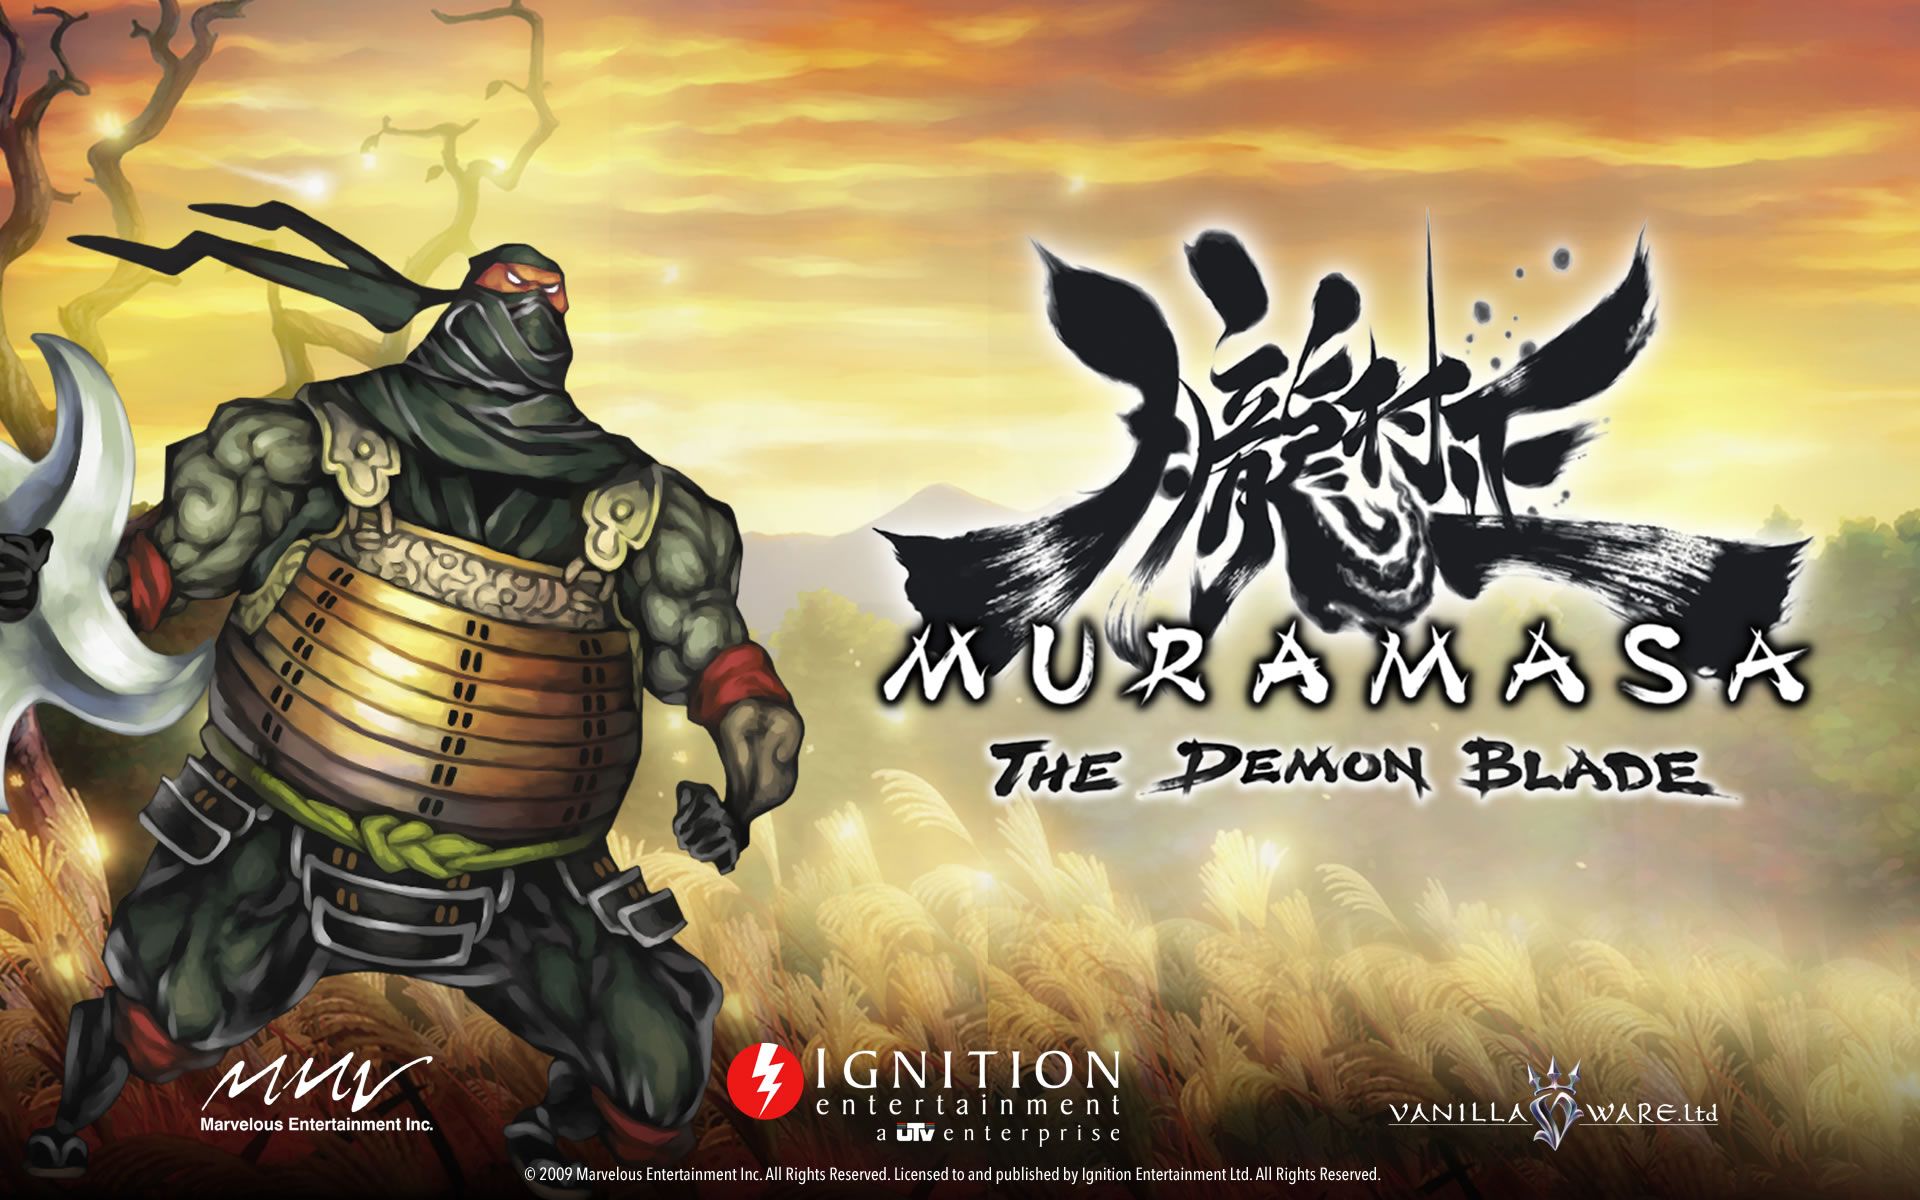 Muramasa: The Demon Blade screenshots, images and pictures - Giant ...